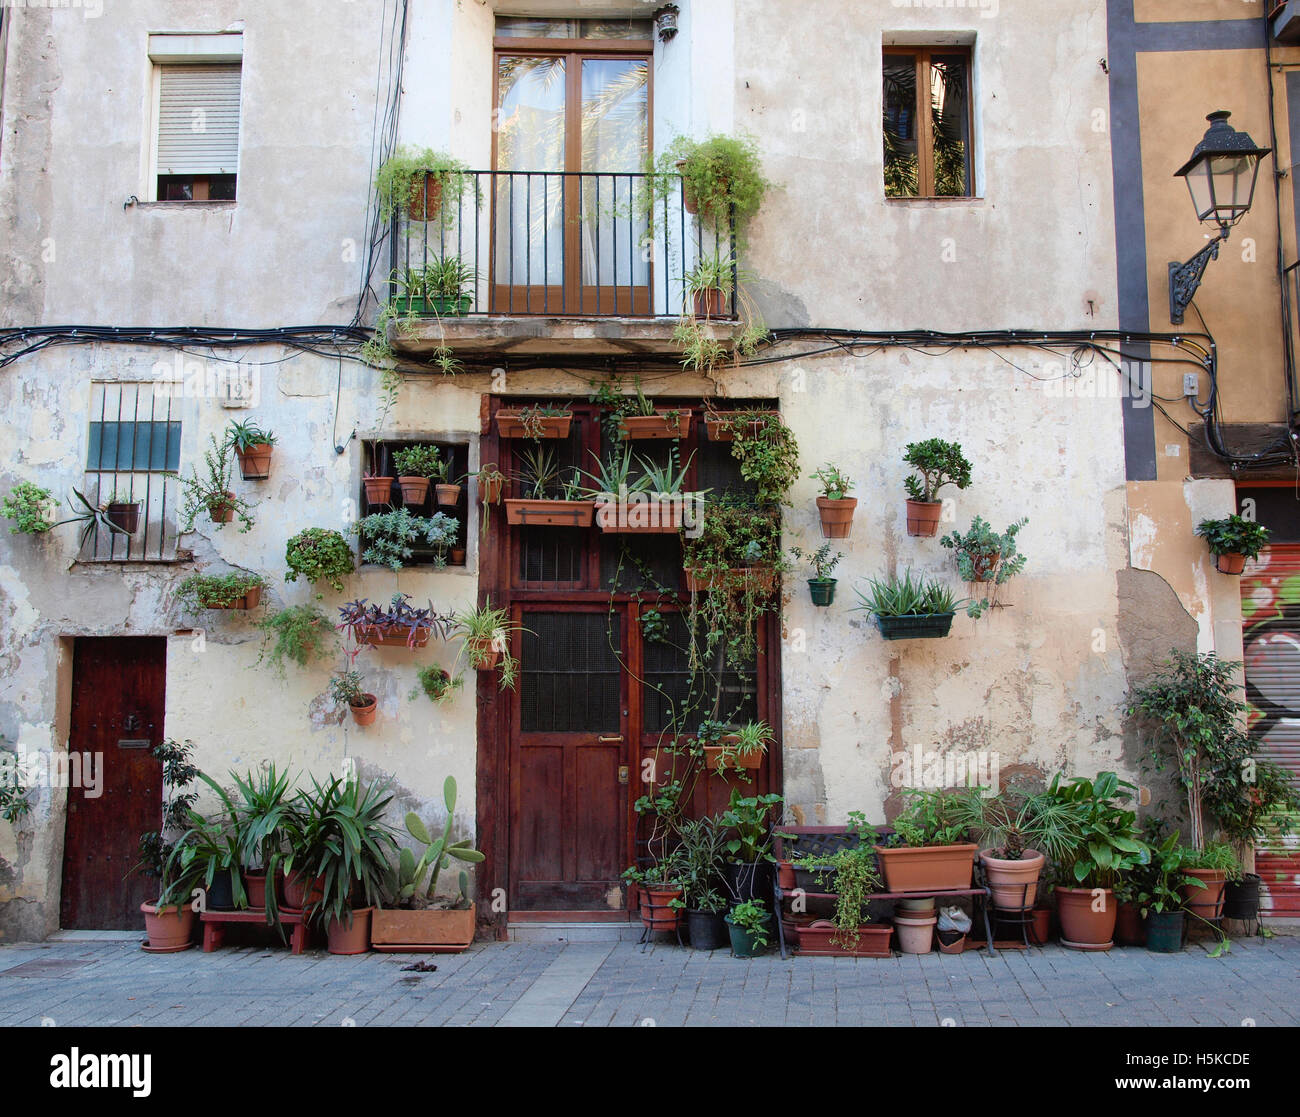 IMAGES OF PROPERTIES AND PLACES IN GOTHIC QUARTER BARCELONA SPAIN Stock Photo